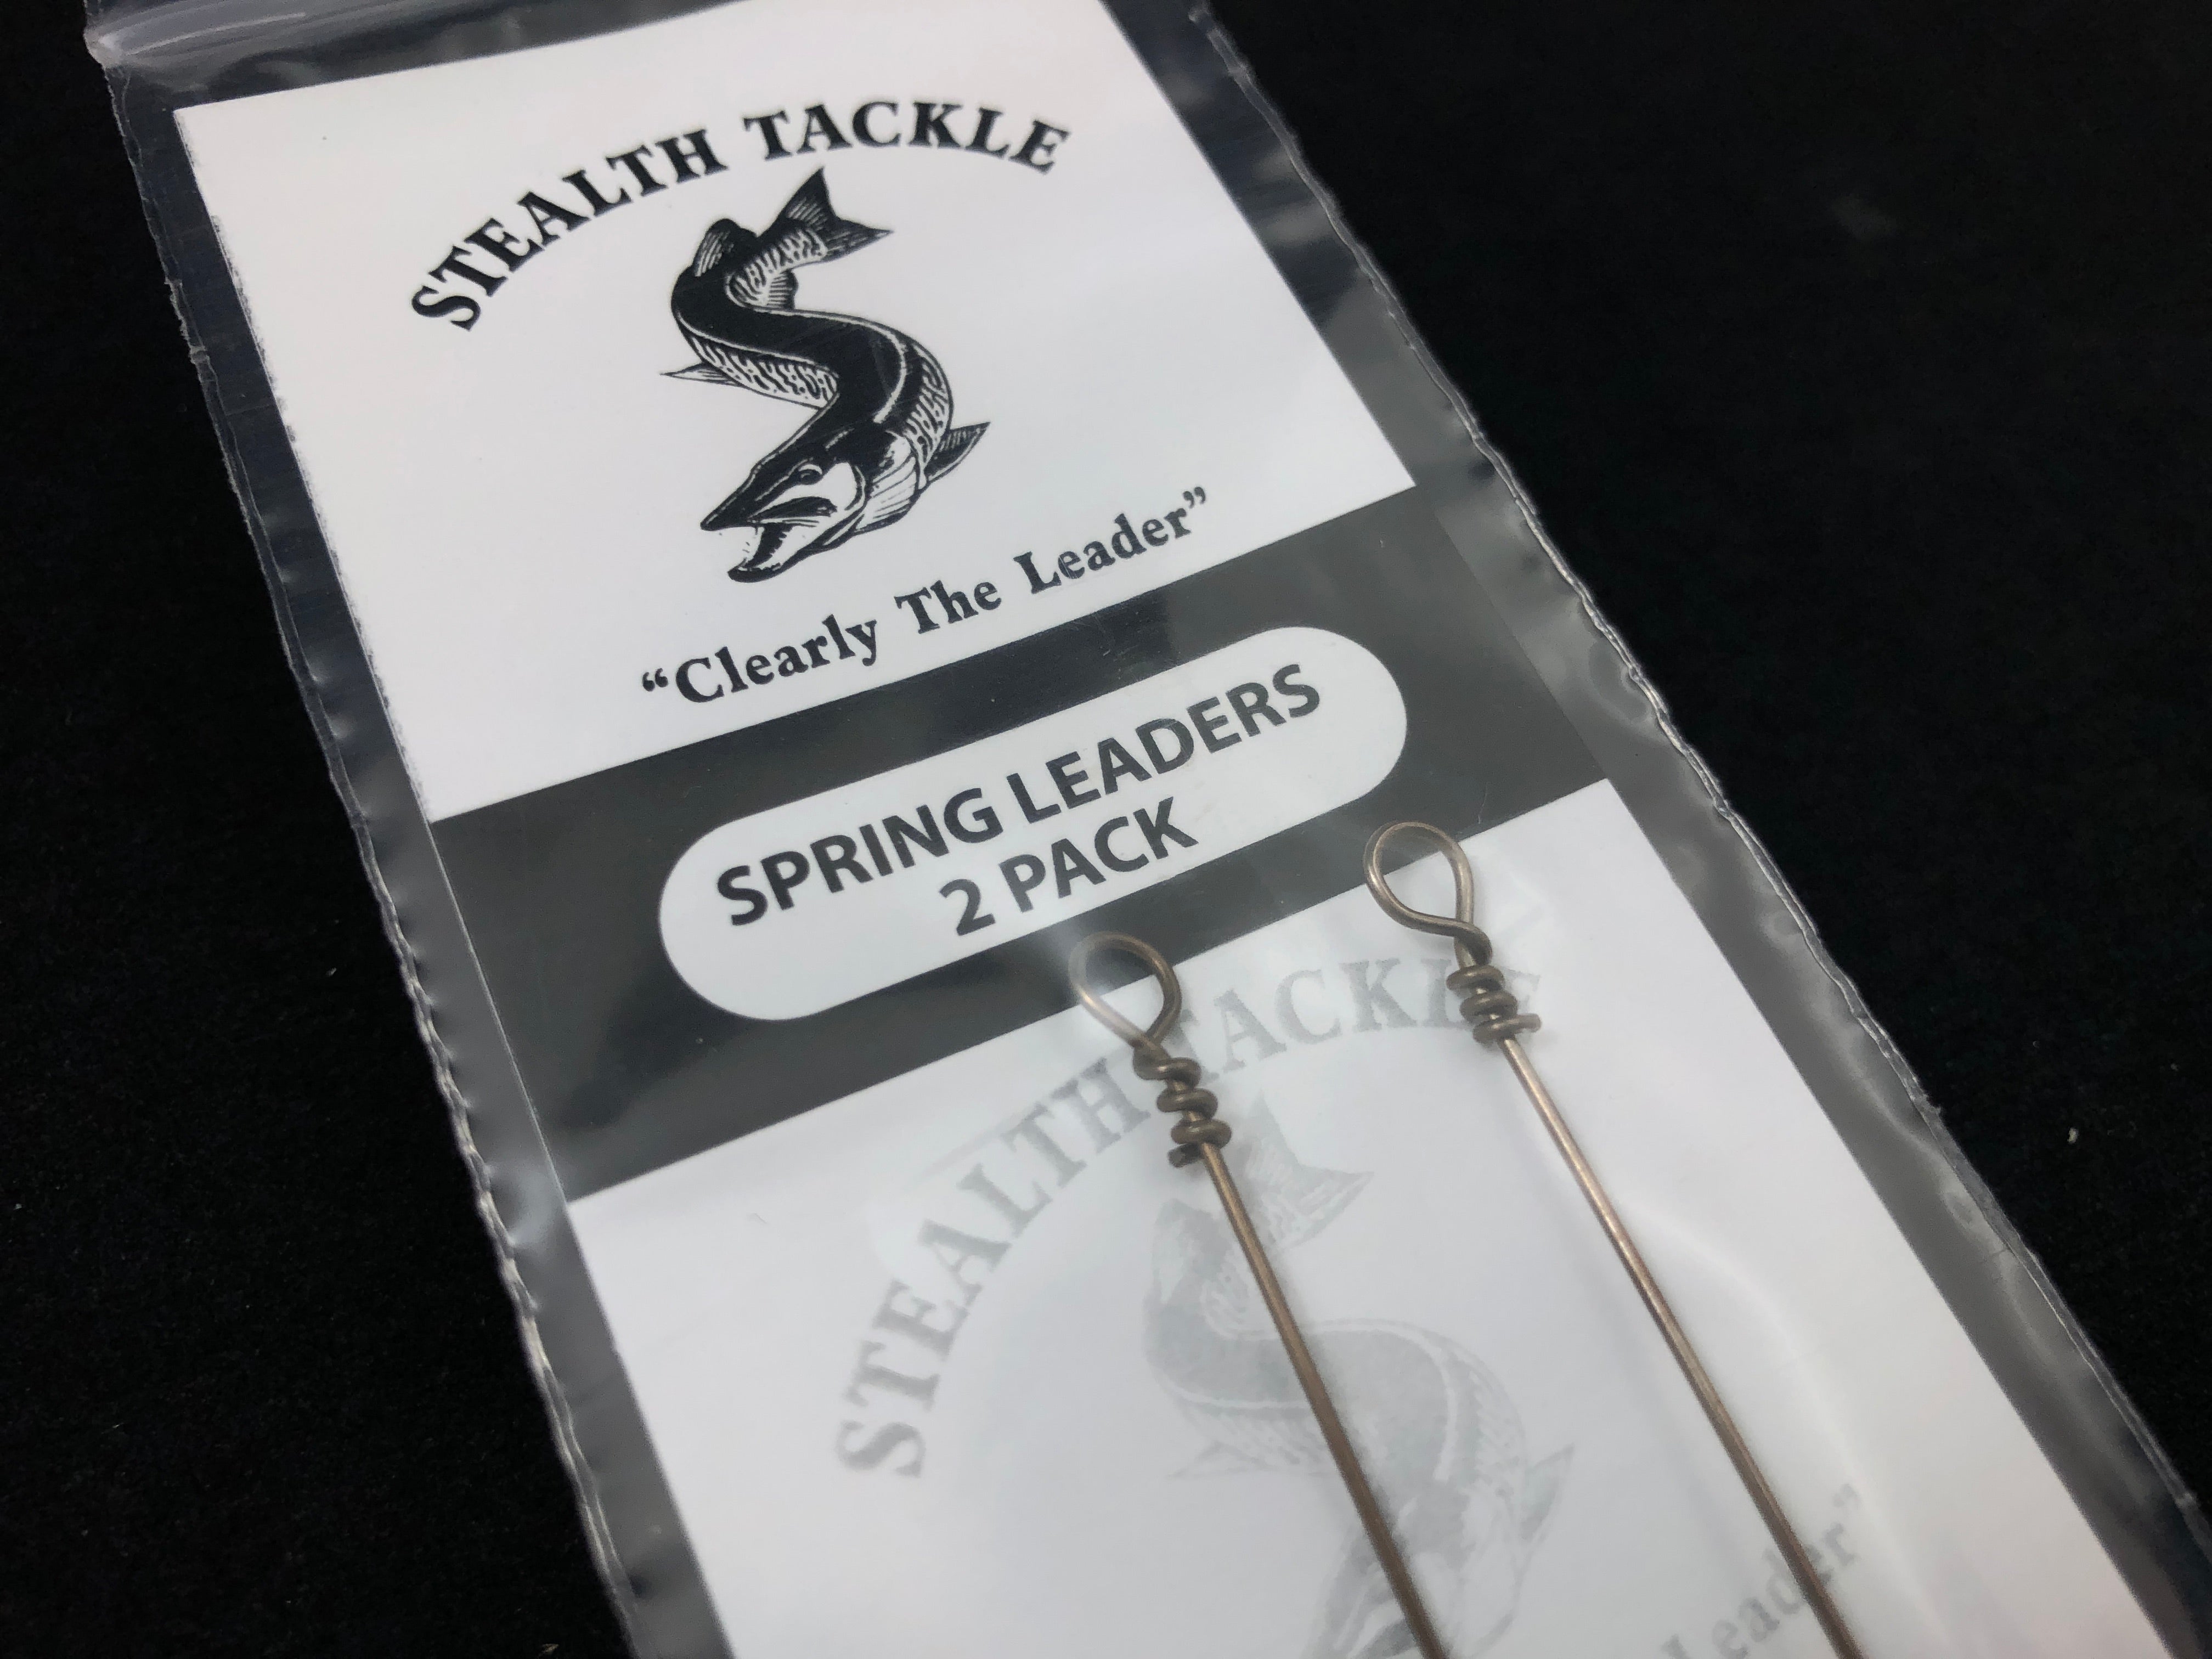 2 Pack 124# Solid Wire Twitch Bait Leaders - Stealth Tackle